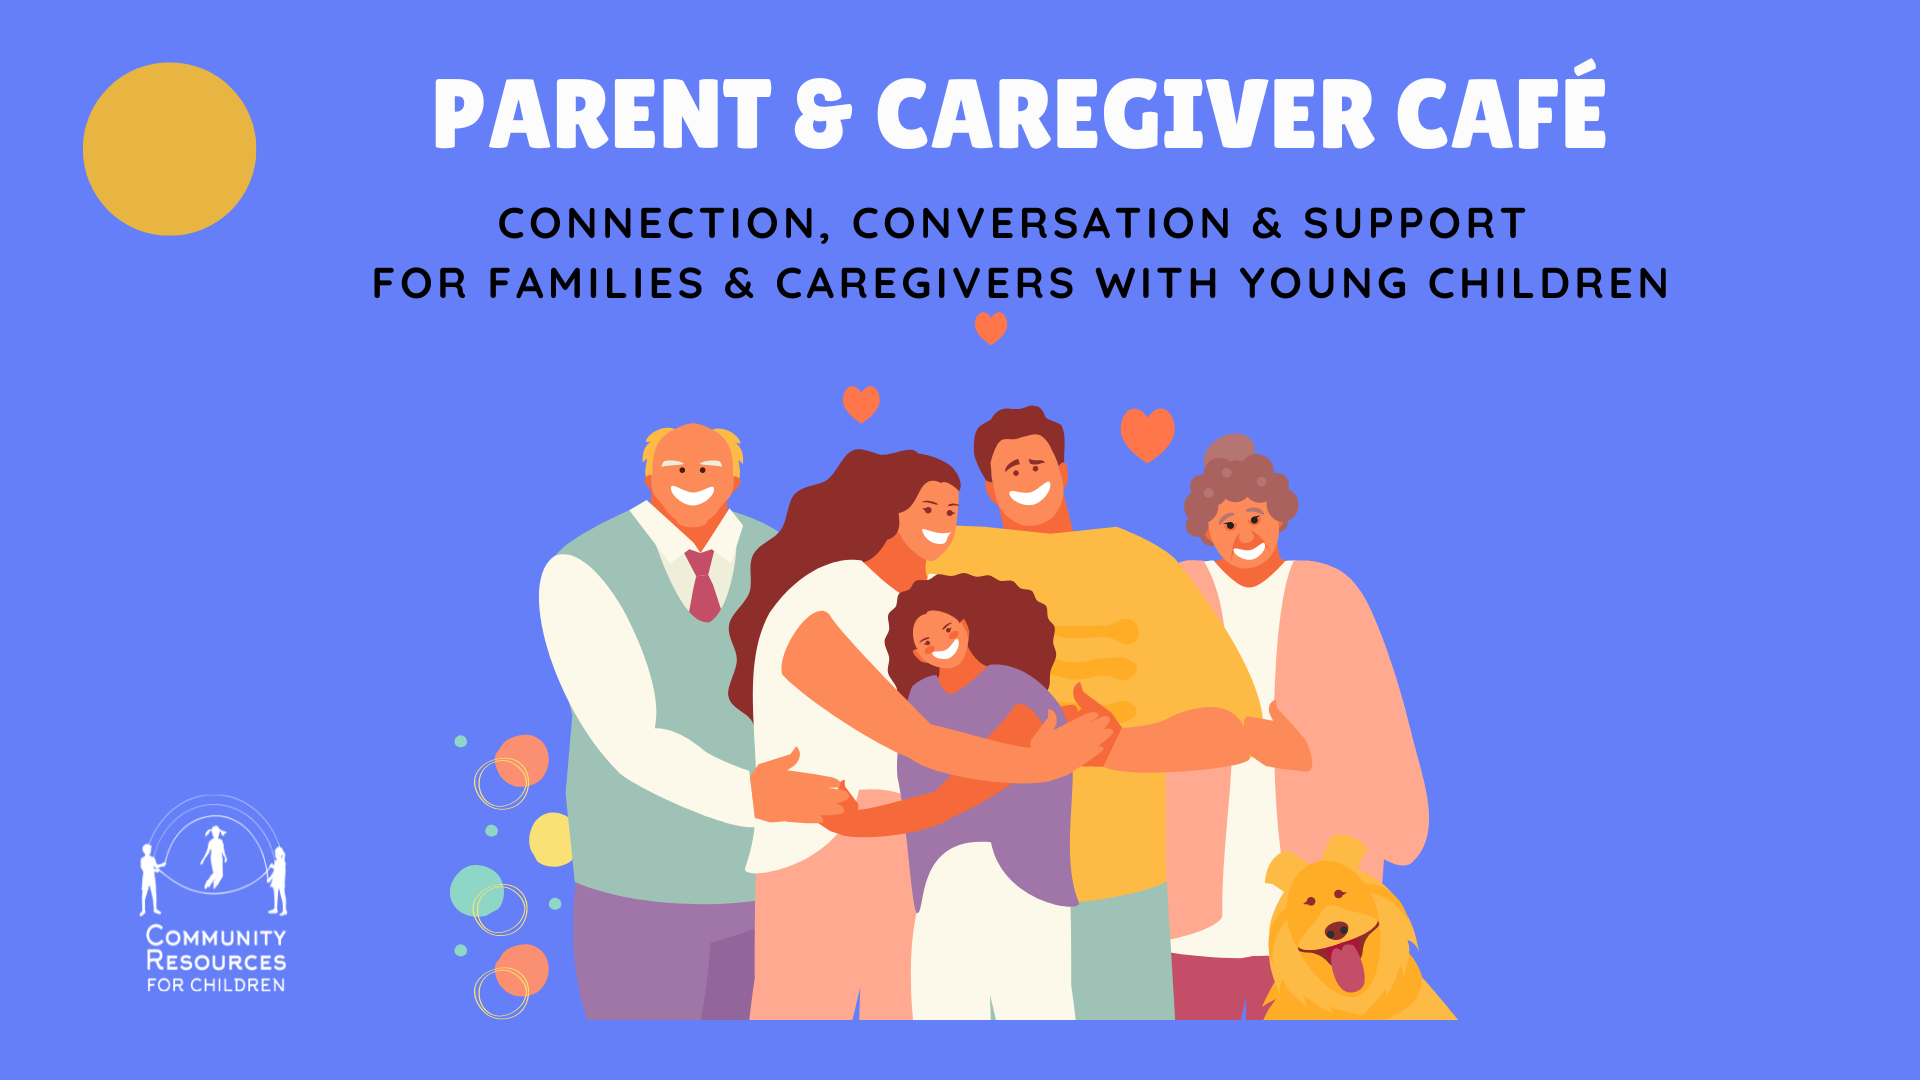 The Parent & Caregiver Café is providing connection, conversation, and support for families and caregivers with young children, as well as community resources for children. Full Text: PARENT & CAREGIVER CAFÉ CONNECTION, CONVERSATION & SUPPORT FOR FAMILIES & CAREGIVERS WITH YOUNG CHILDREN COMMUNITY RESOURCES FOR CHILDREN